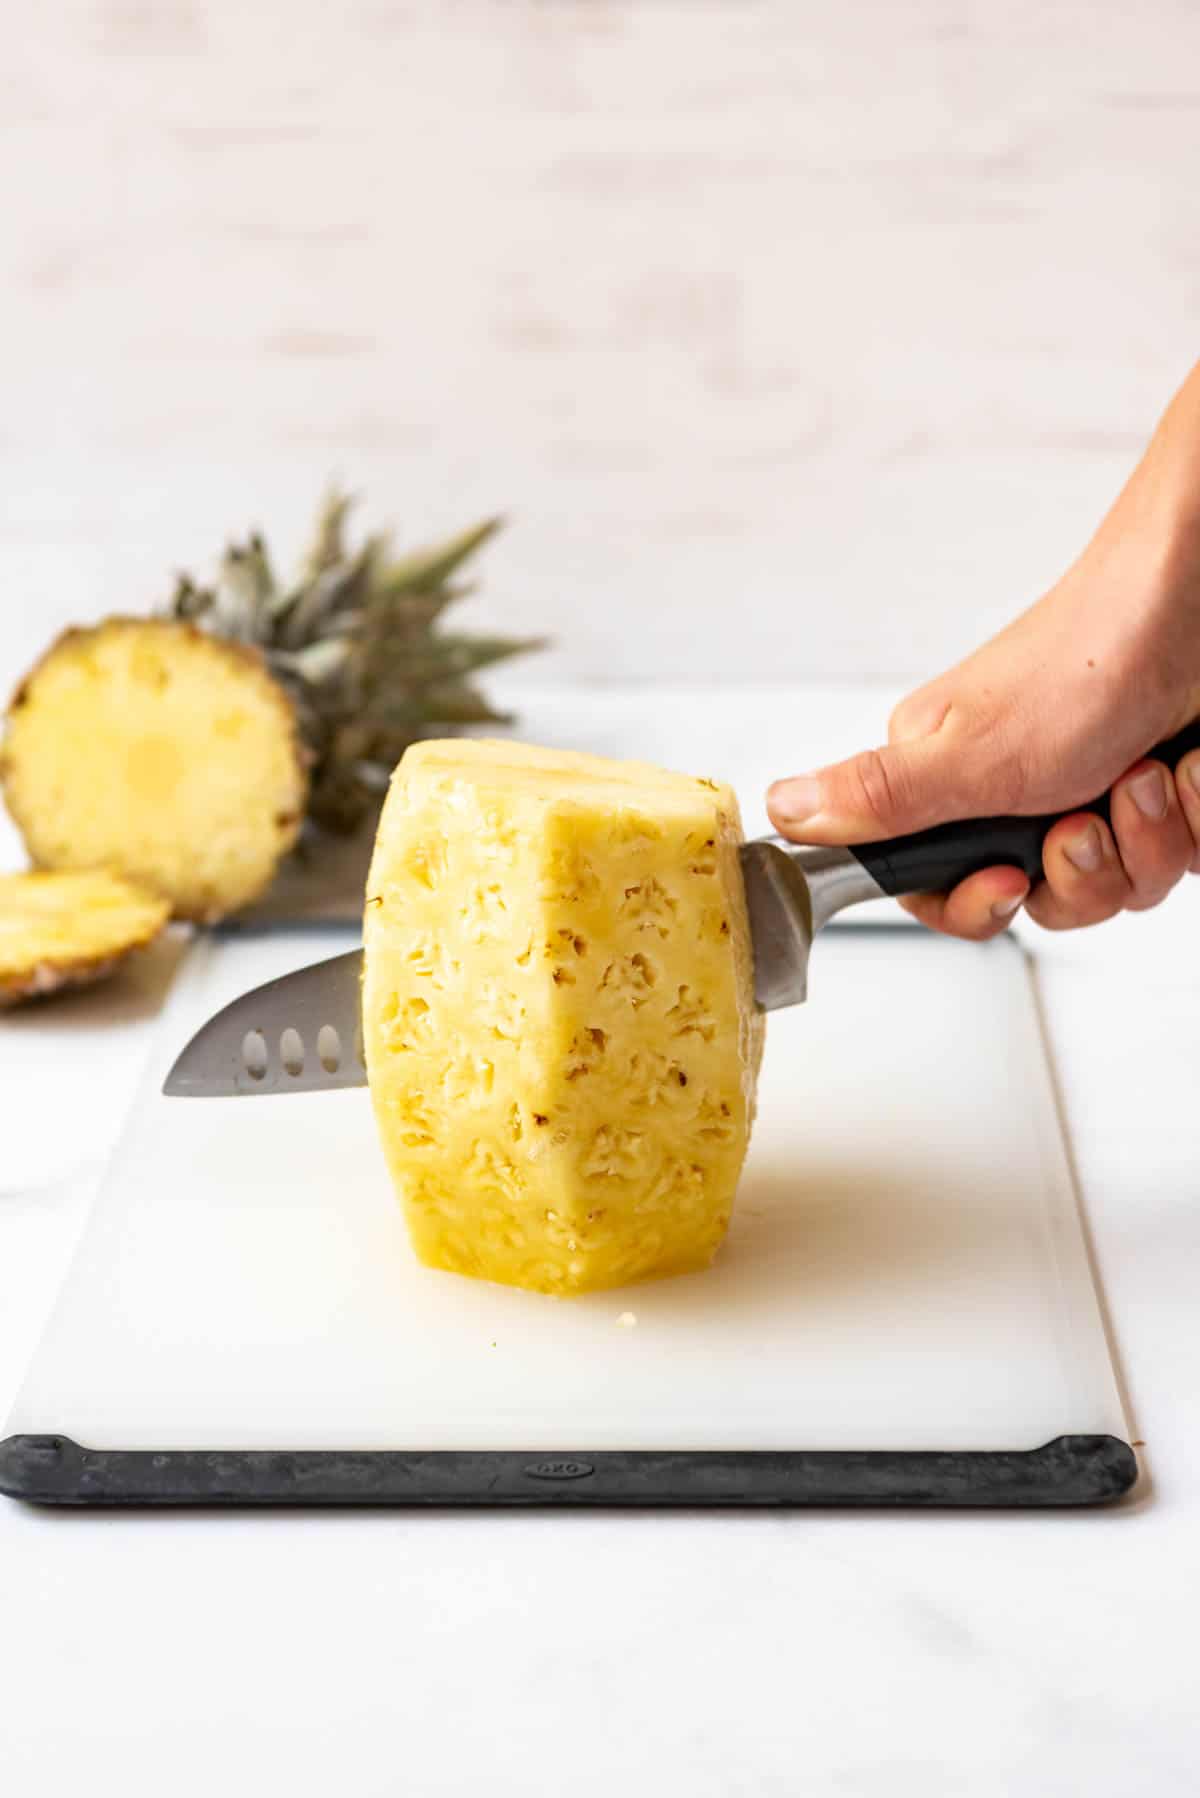 A knife being used to cut a pineapple in half.